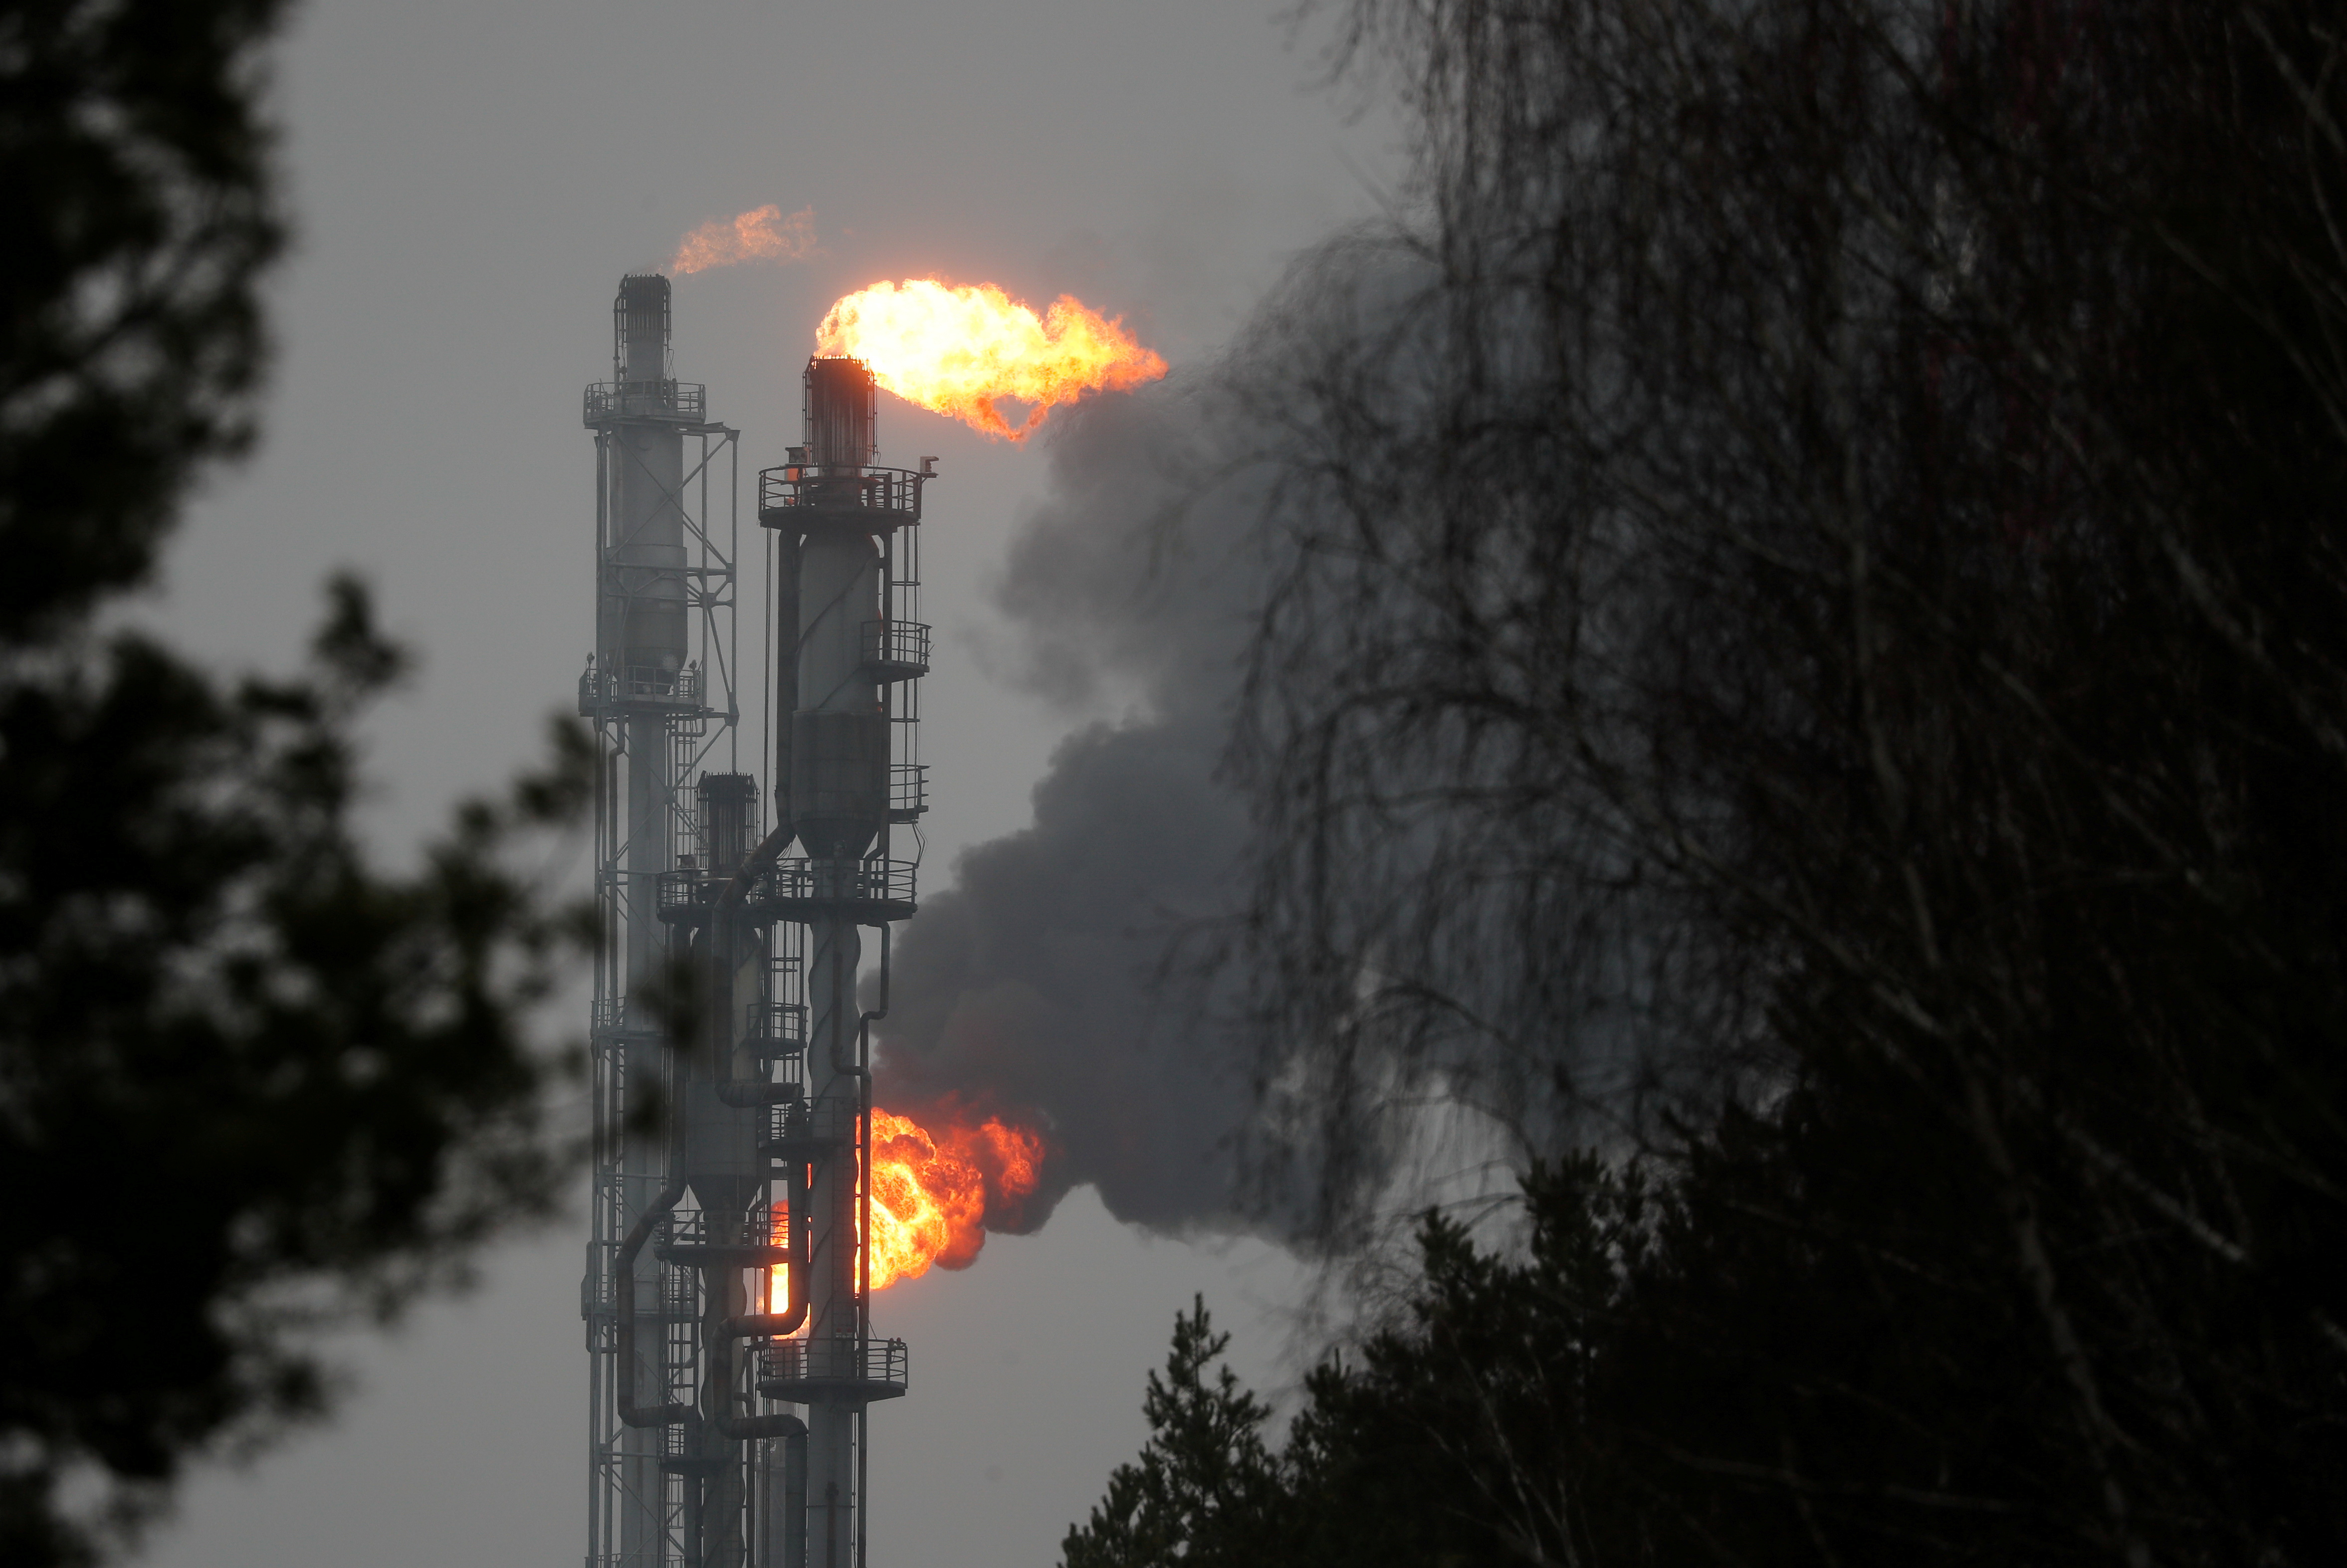 A flame burning natural gas is seen at the Joint stock company "Mozyr oil refinery" near the town of Mozyr, Belarus January 4, 2020. REUTERS/Vasily Fedosenko/File Photo